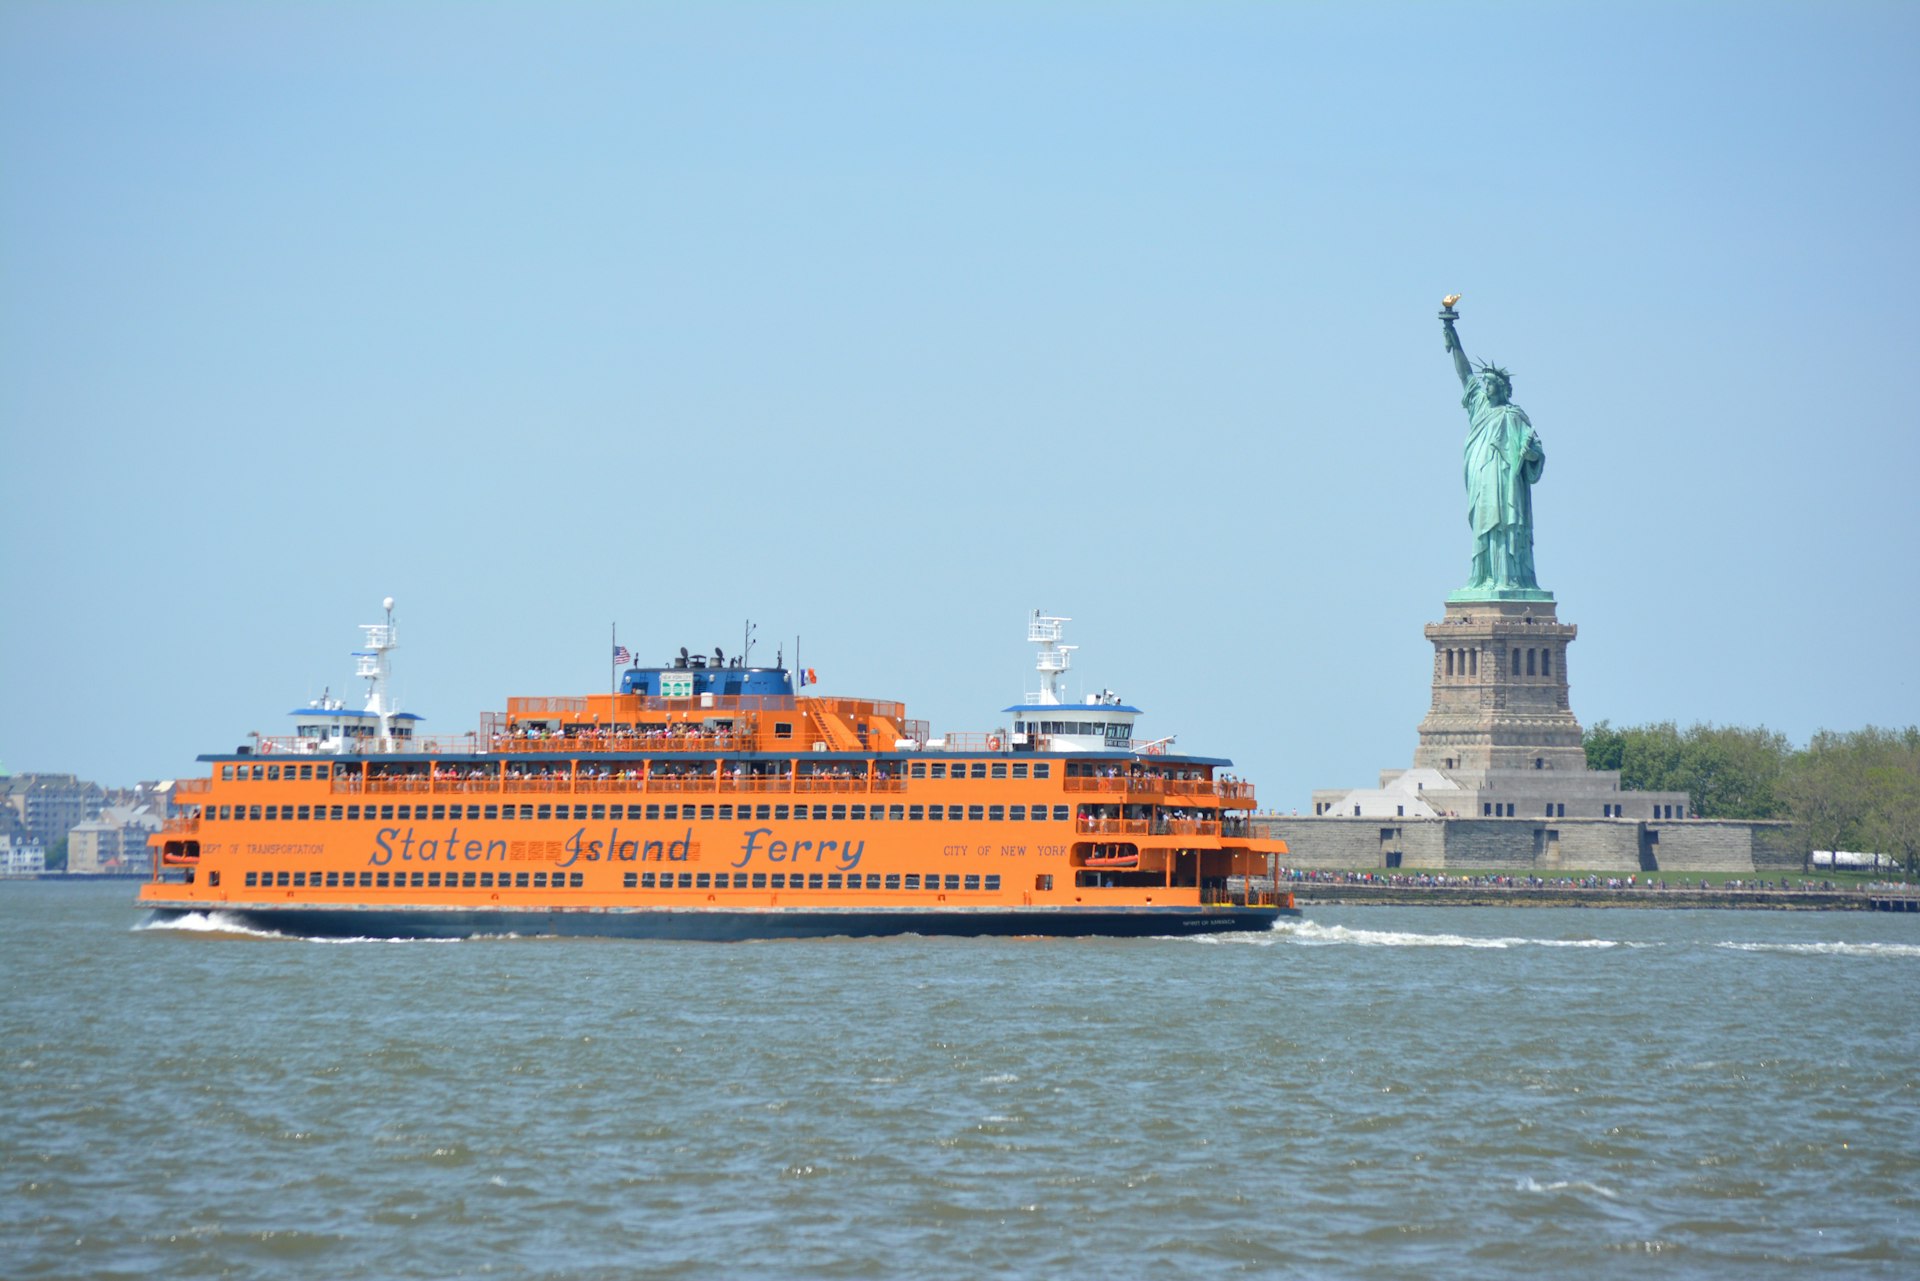 A large yellow-orange ferry sails through a bay with a tall statue of a female holding a burning torch aloft